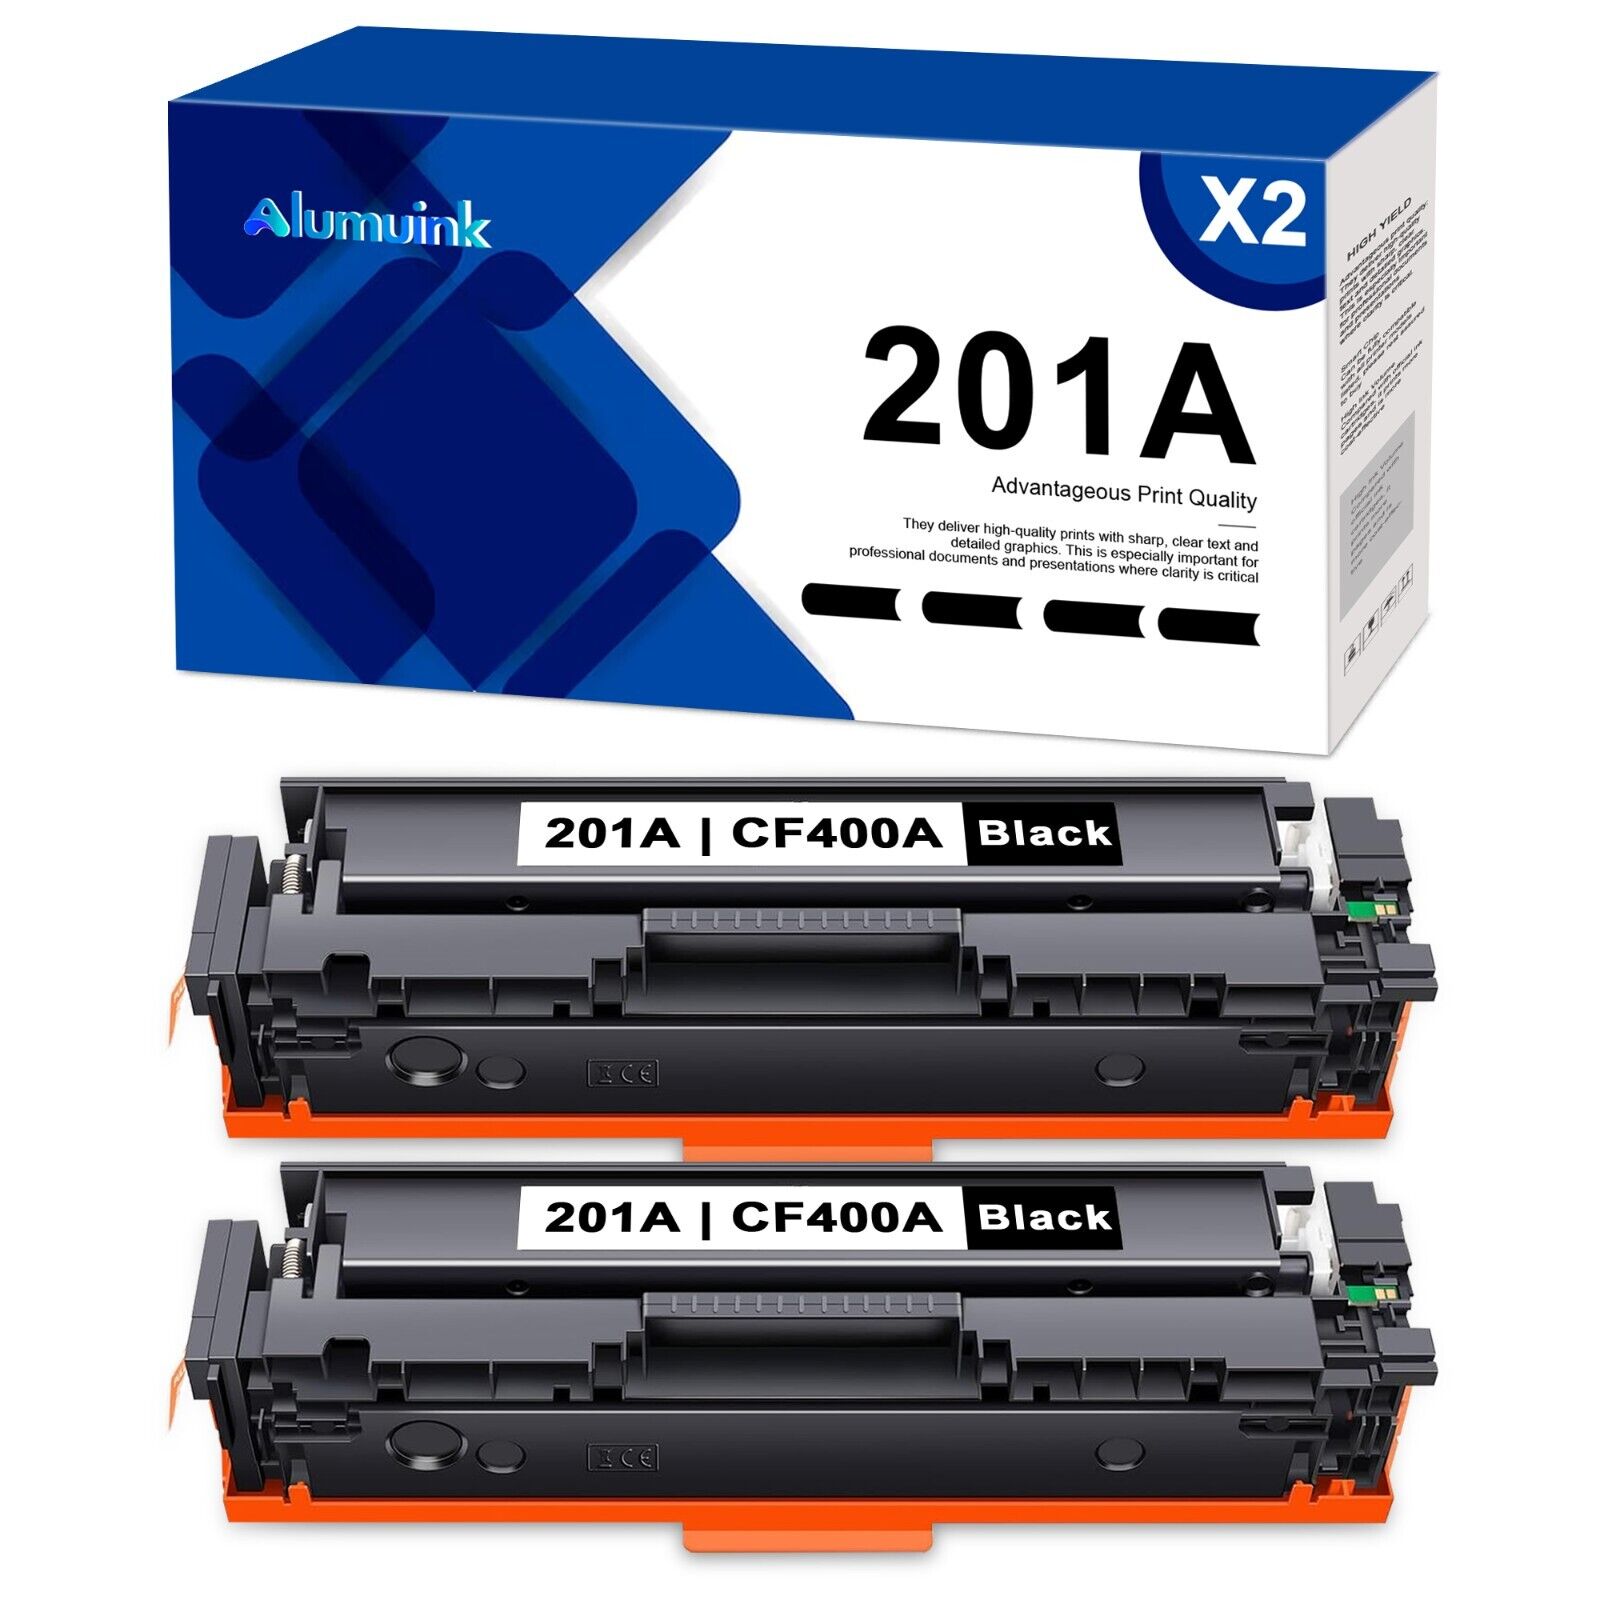 High Yield 201A Black Toner Replacement for HP 201A CF400A Pro MFP M277dw,2 Pack